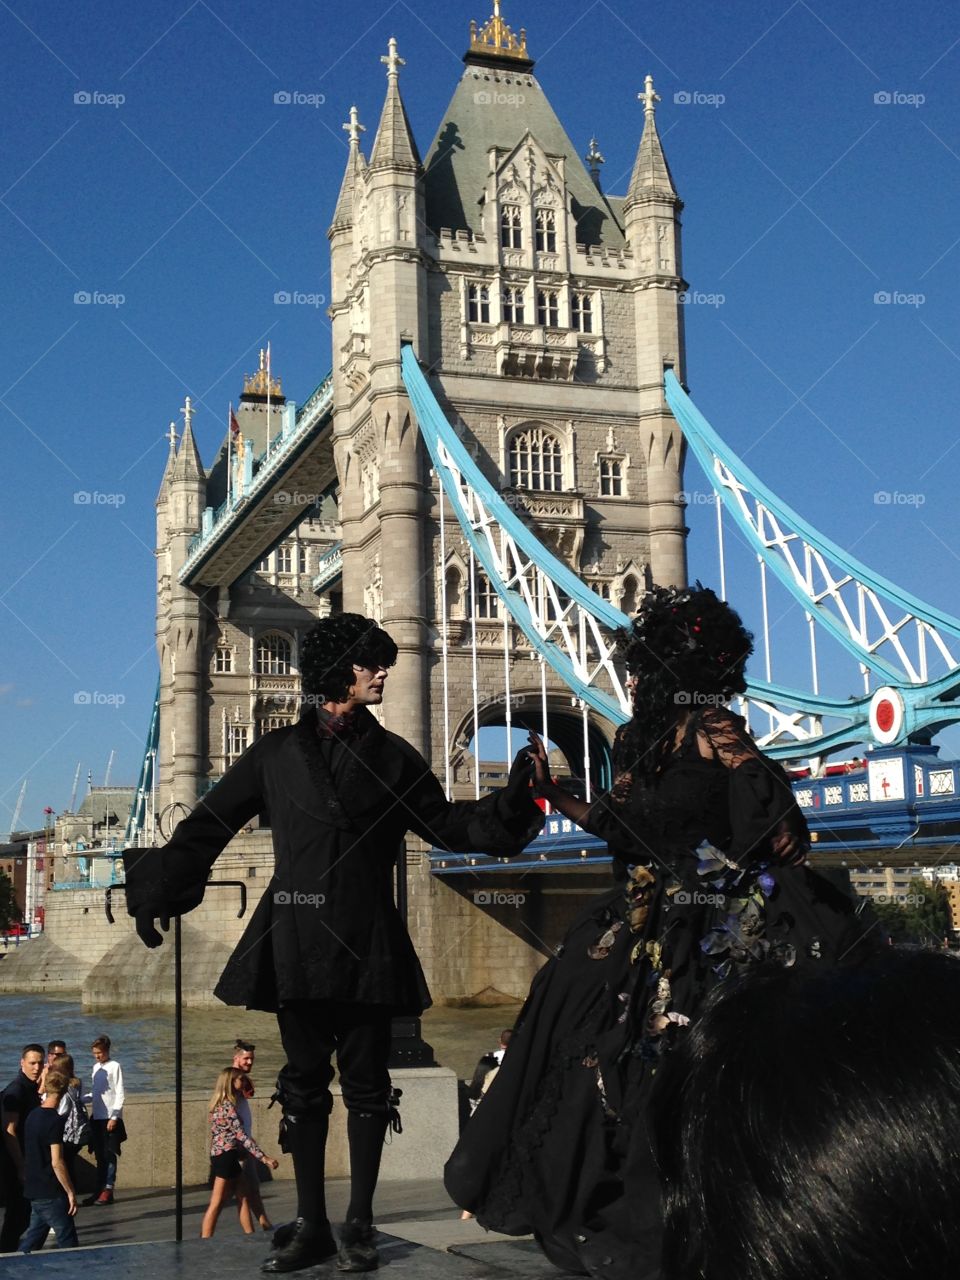 London's Tower Bridge in a very hot summer day. There was dance and performance festival by the river